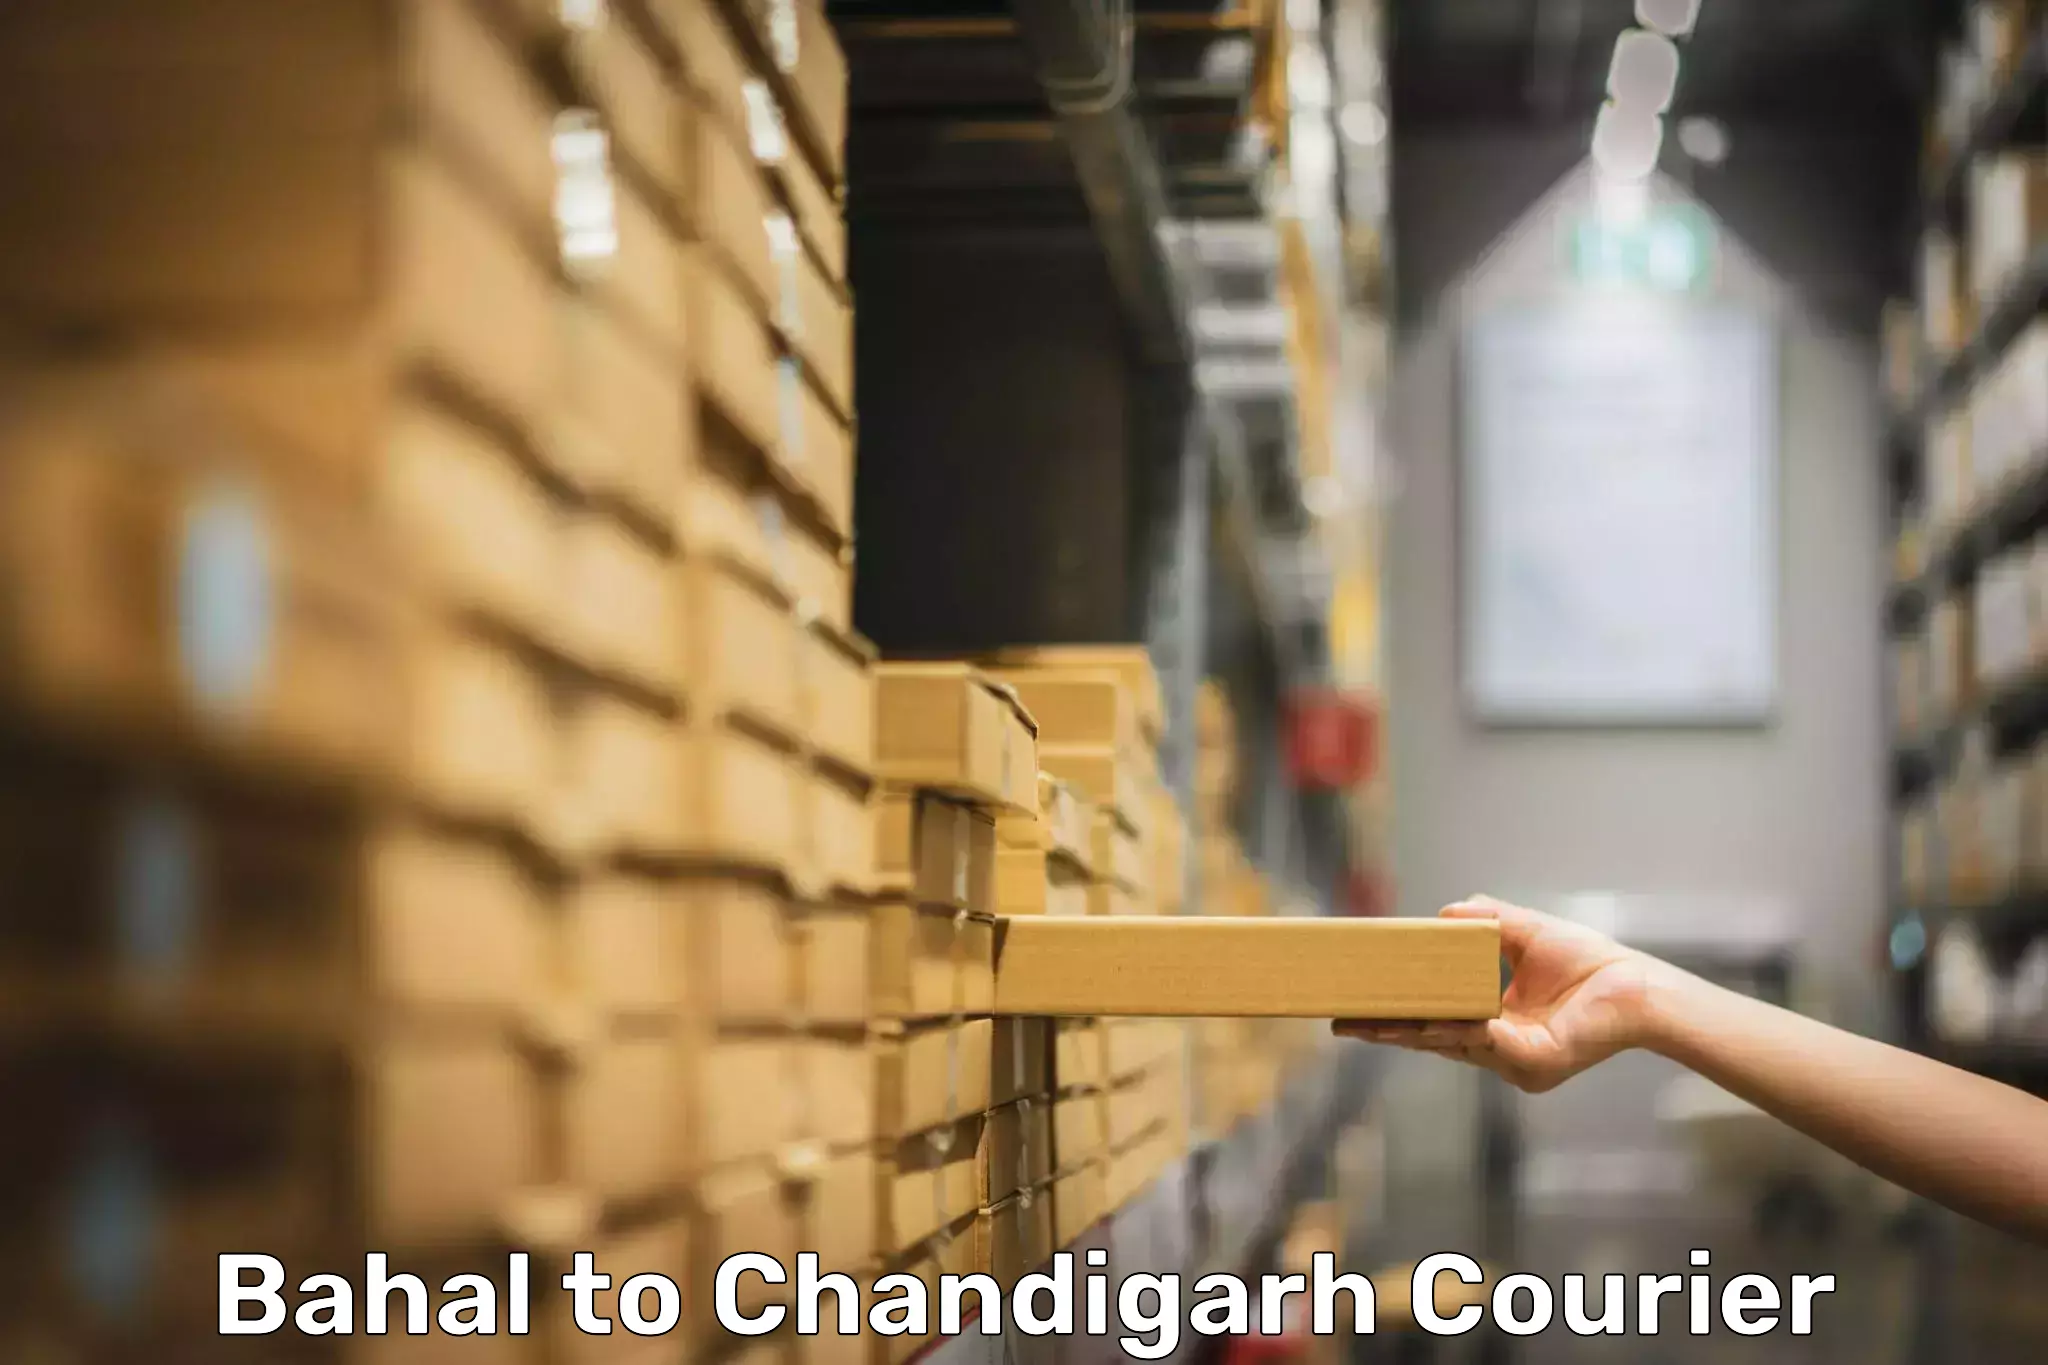 Long distance luggage transport in Bahal to Chandigarh